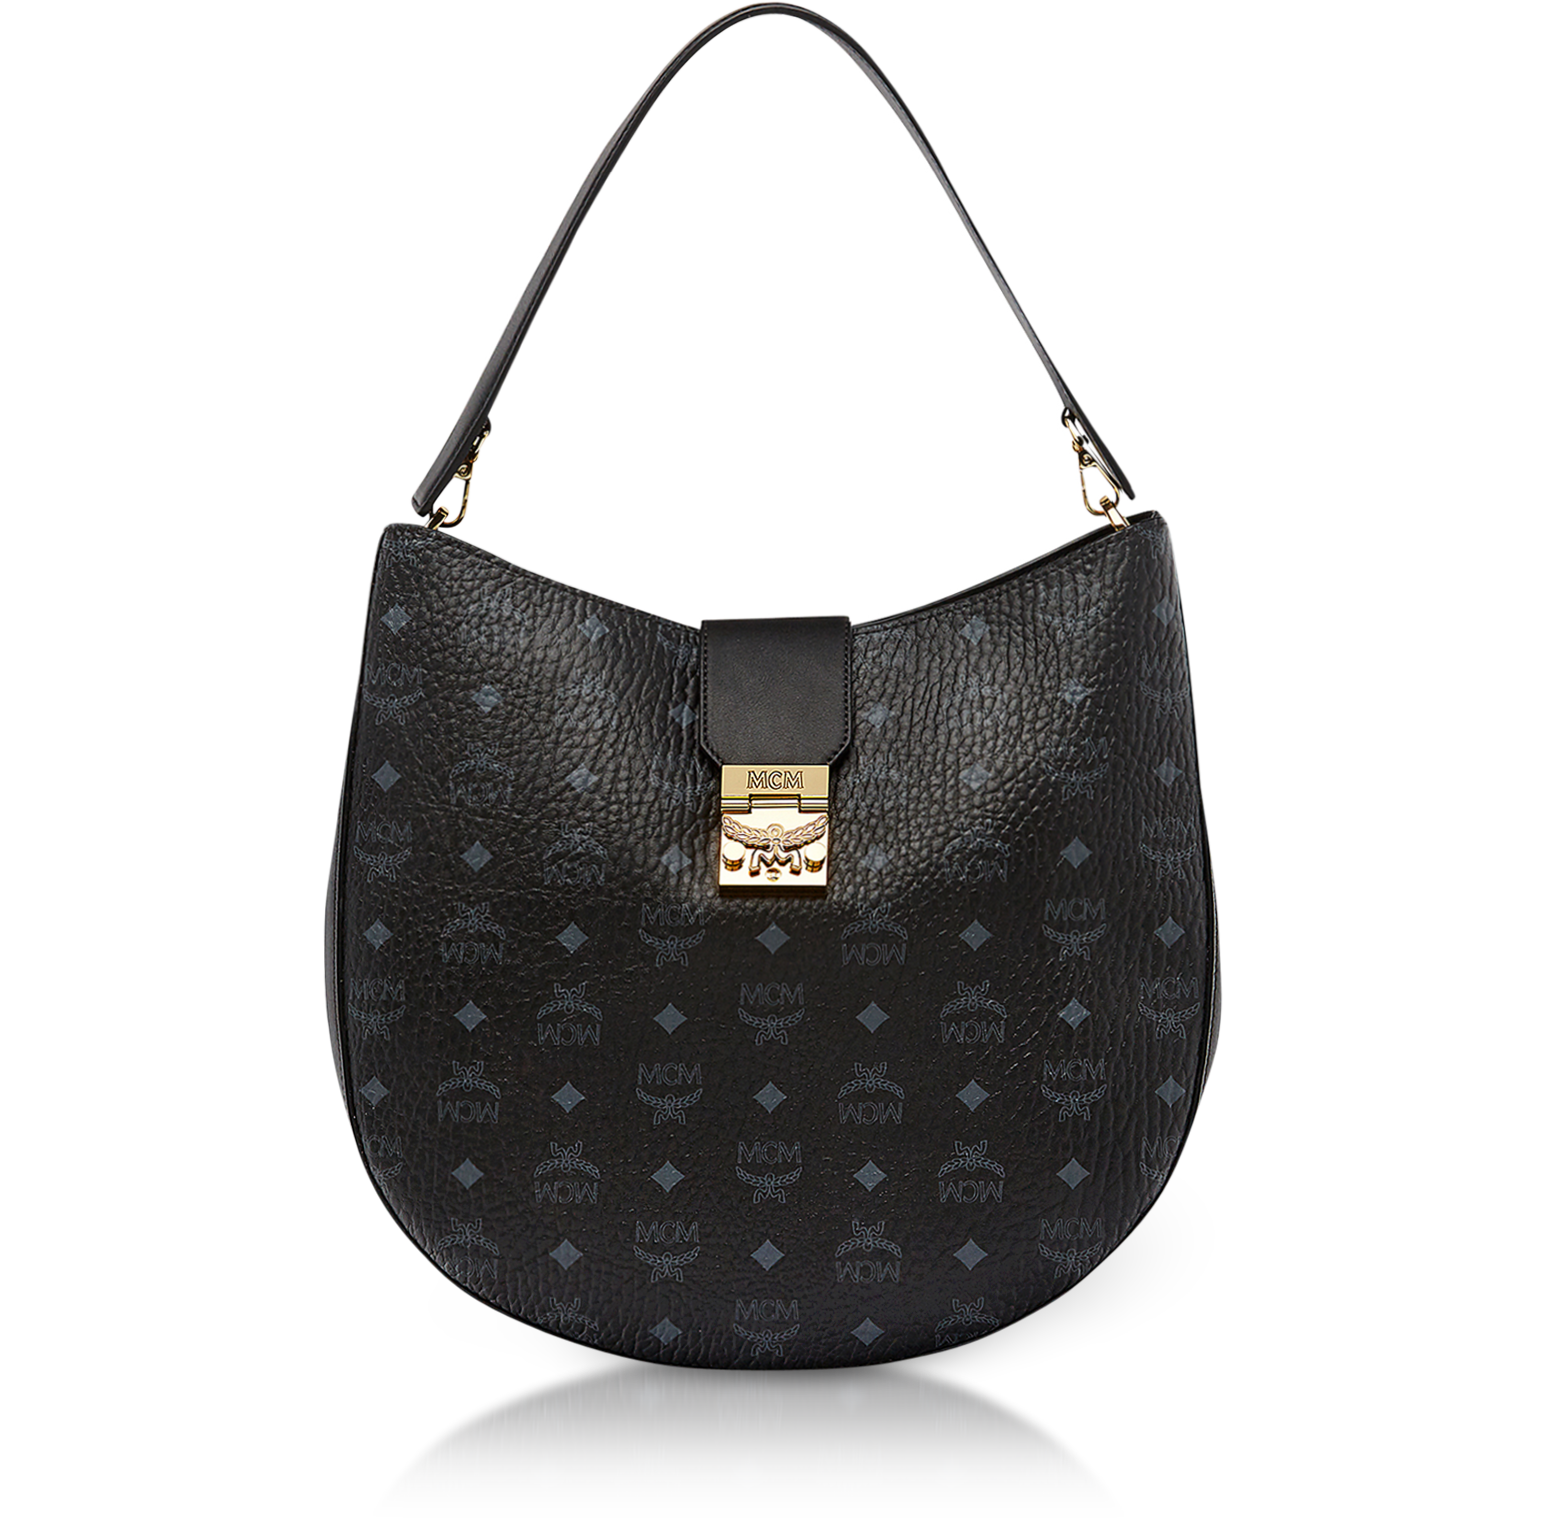 MCM Black Quilted Leather Patricia Shoulder Bag at FORZIERI